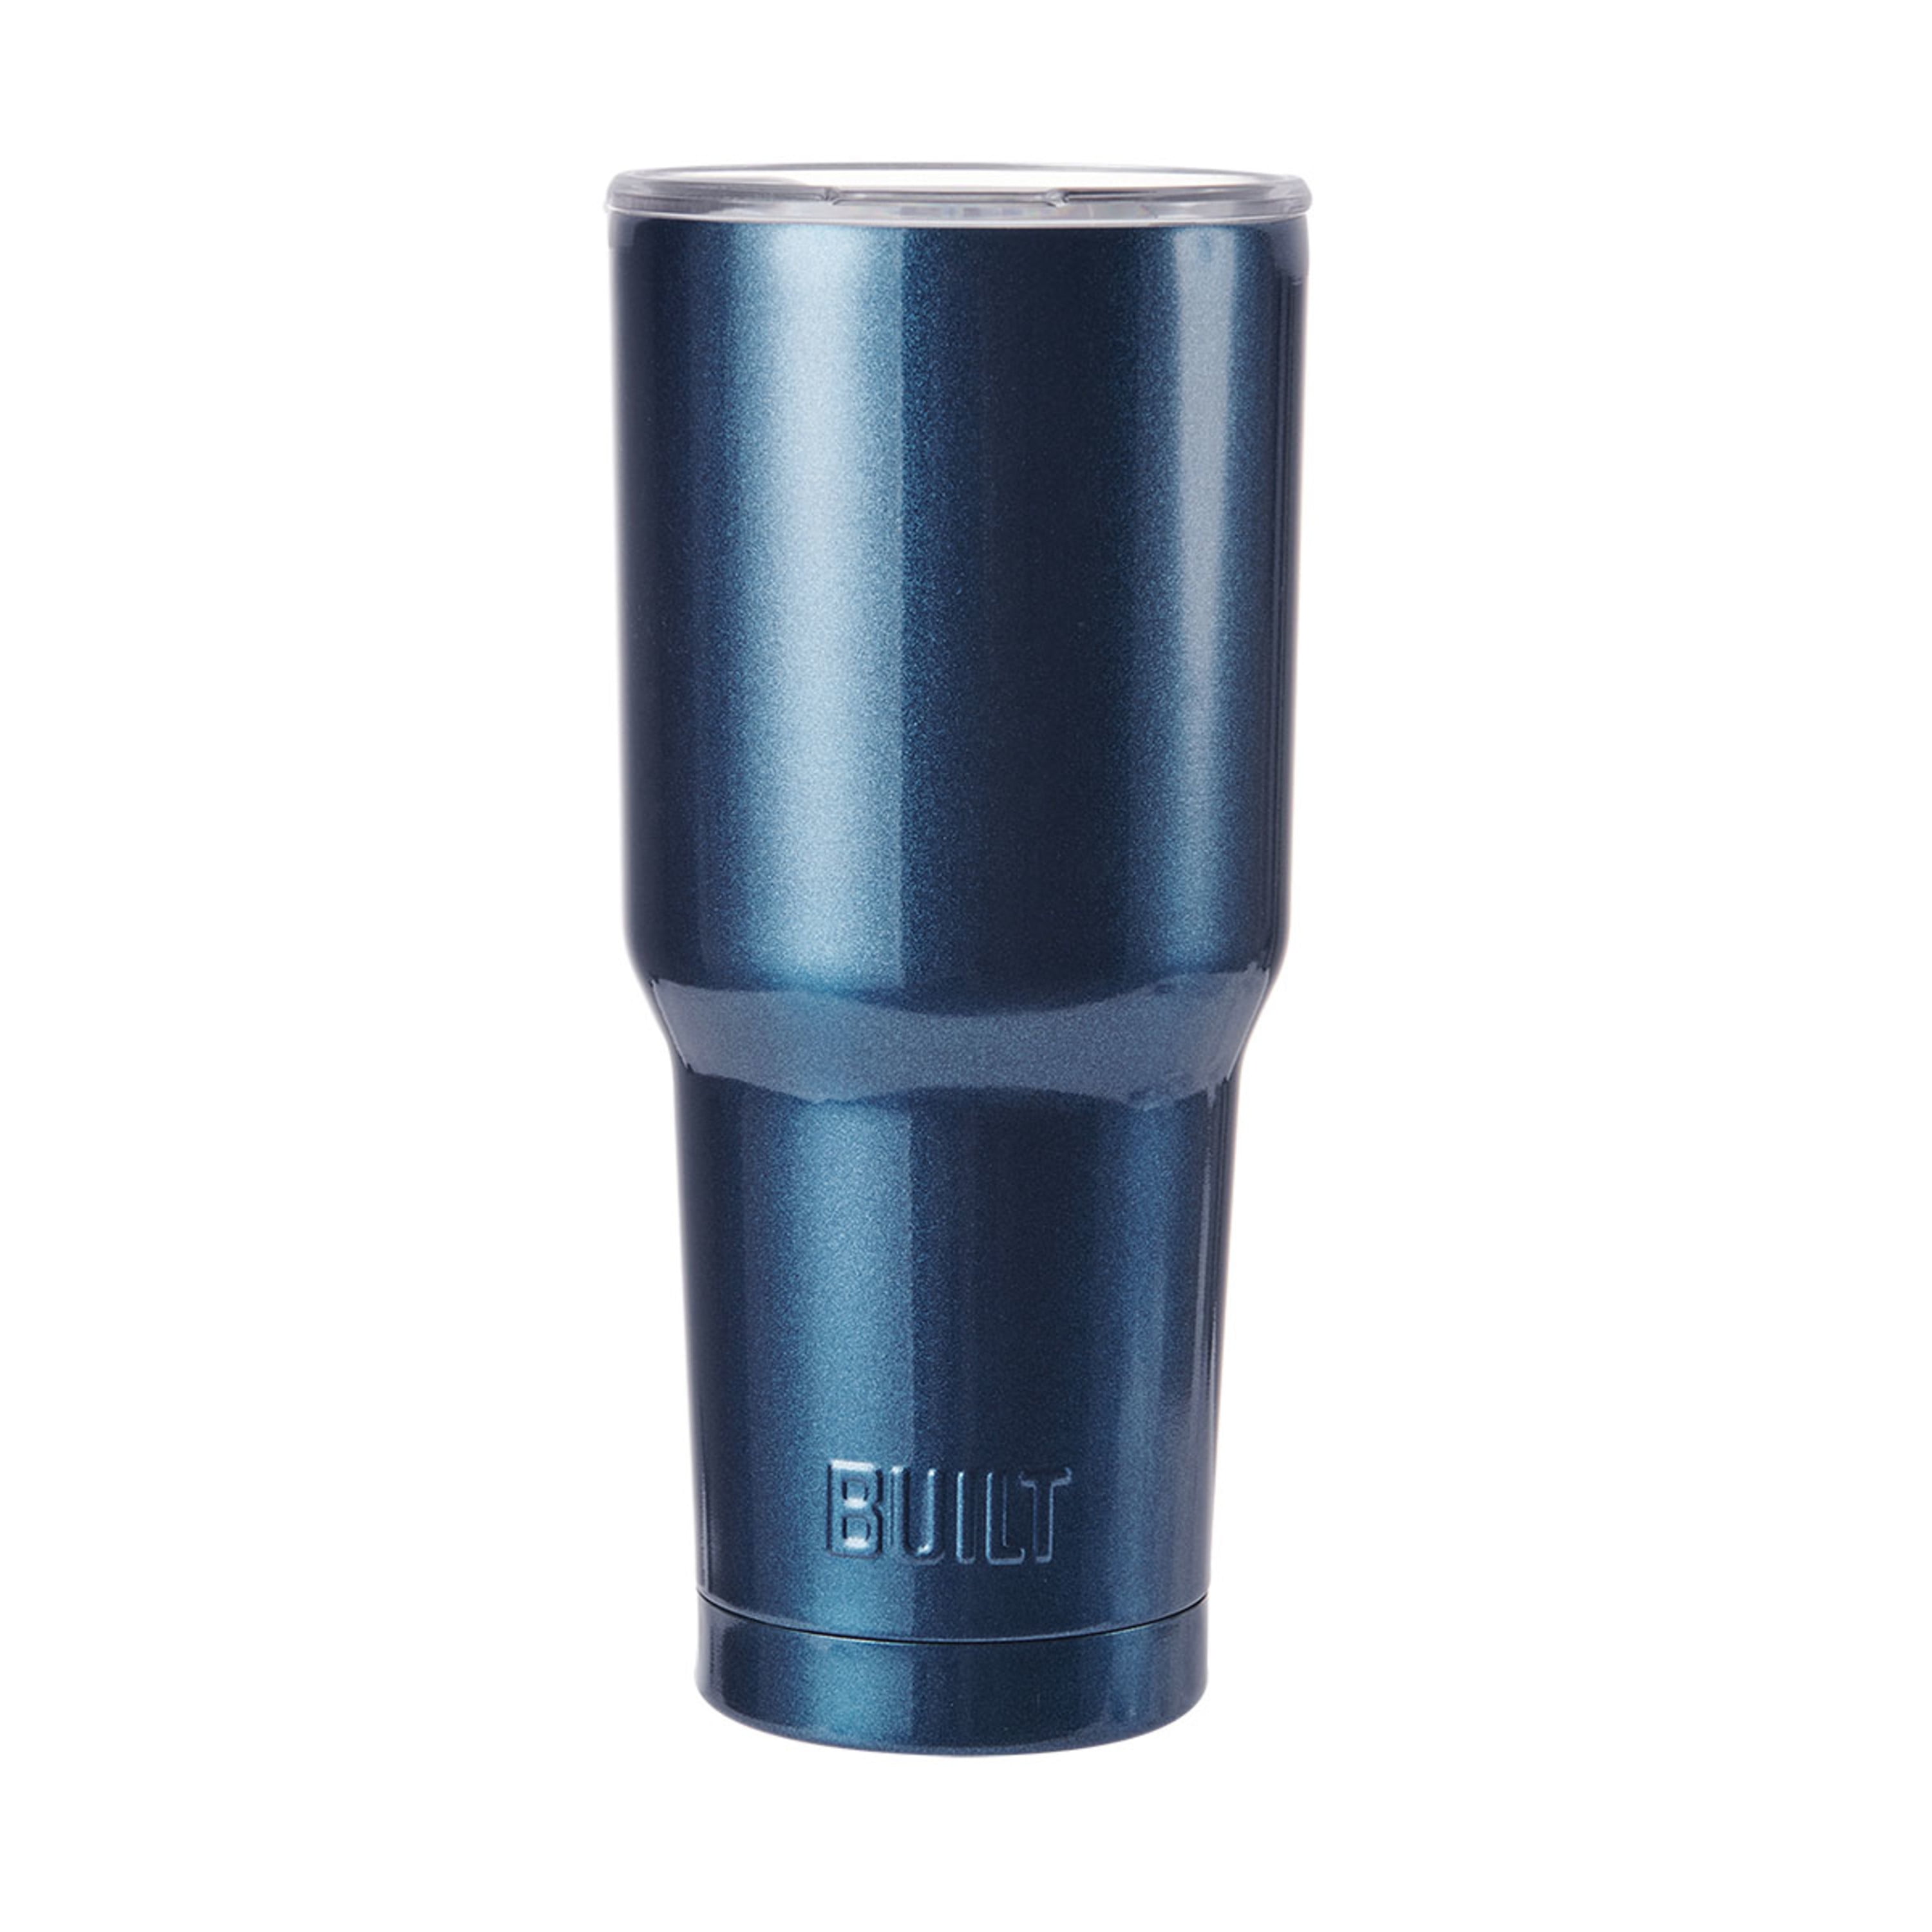 Built 30-Ounce Double-Walled Stainless Steel Tumbler in Medieval Blue